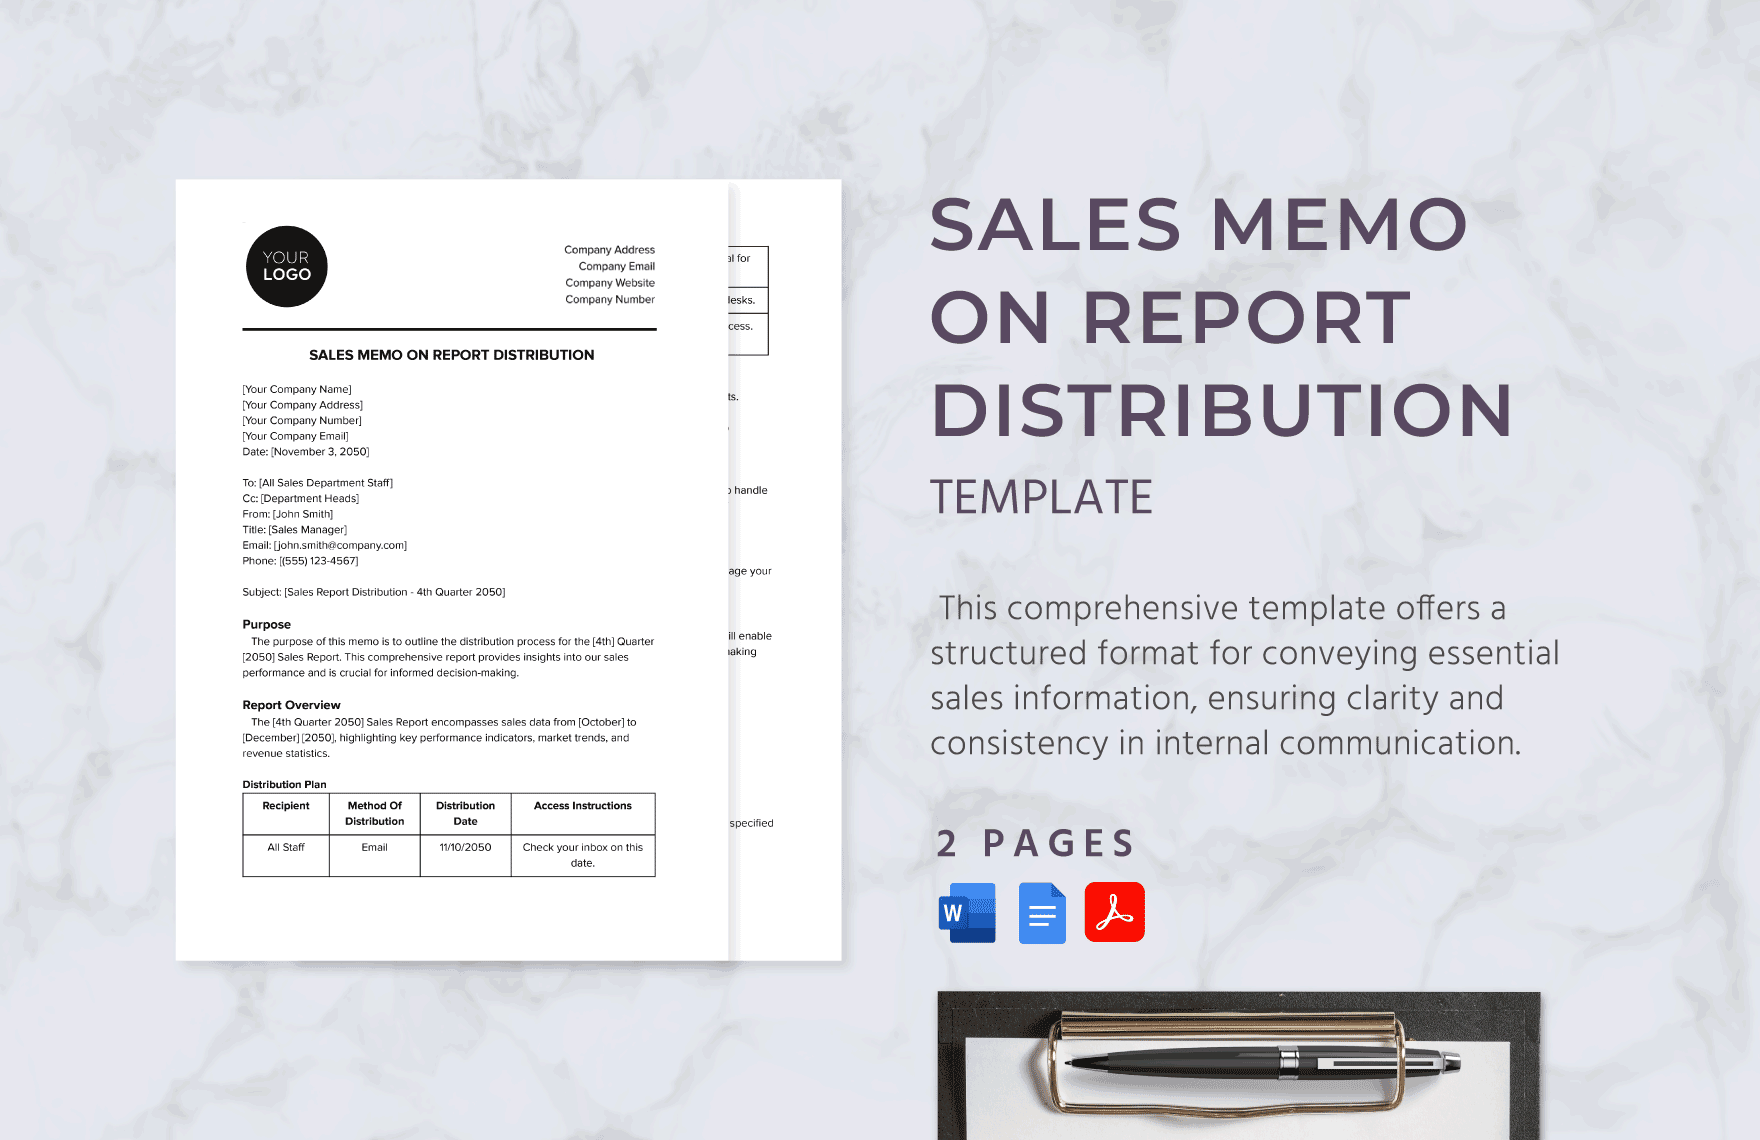 Sales Memo on Report Distribution Template